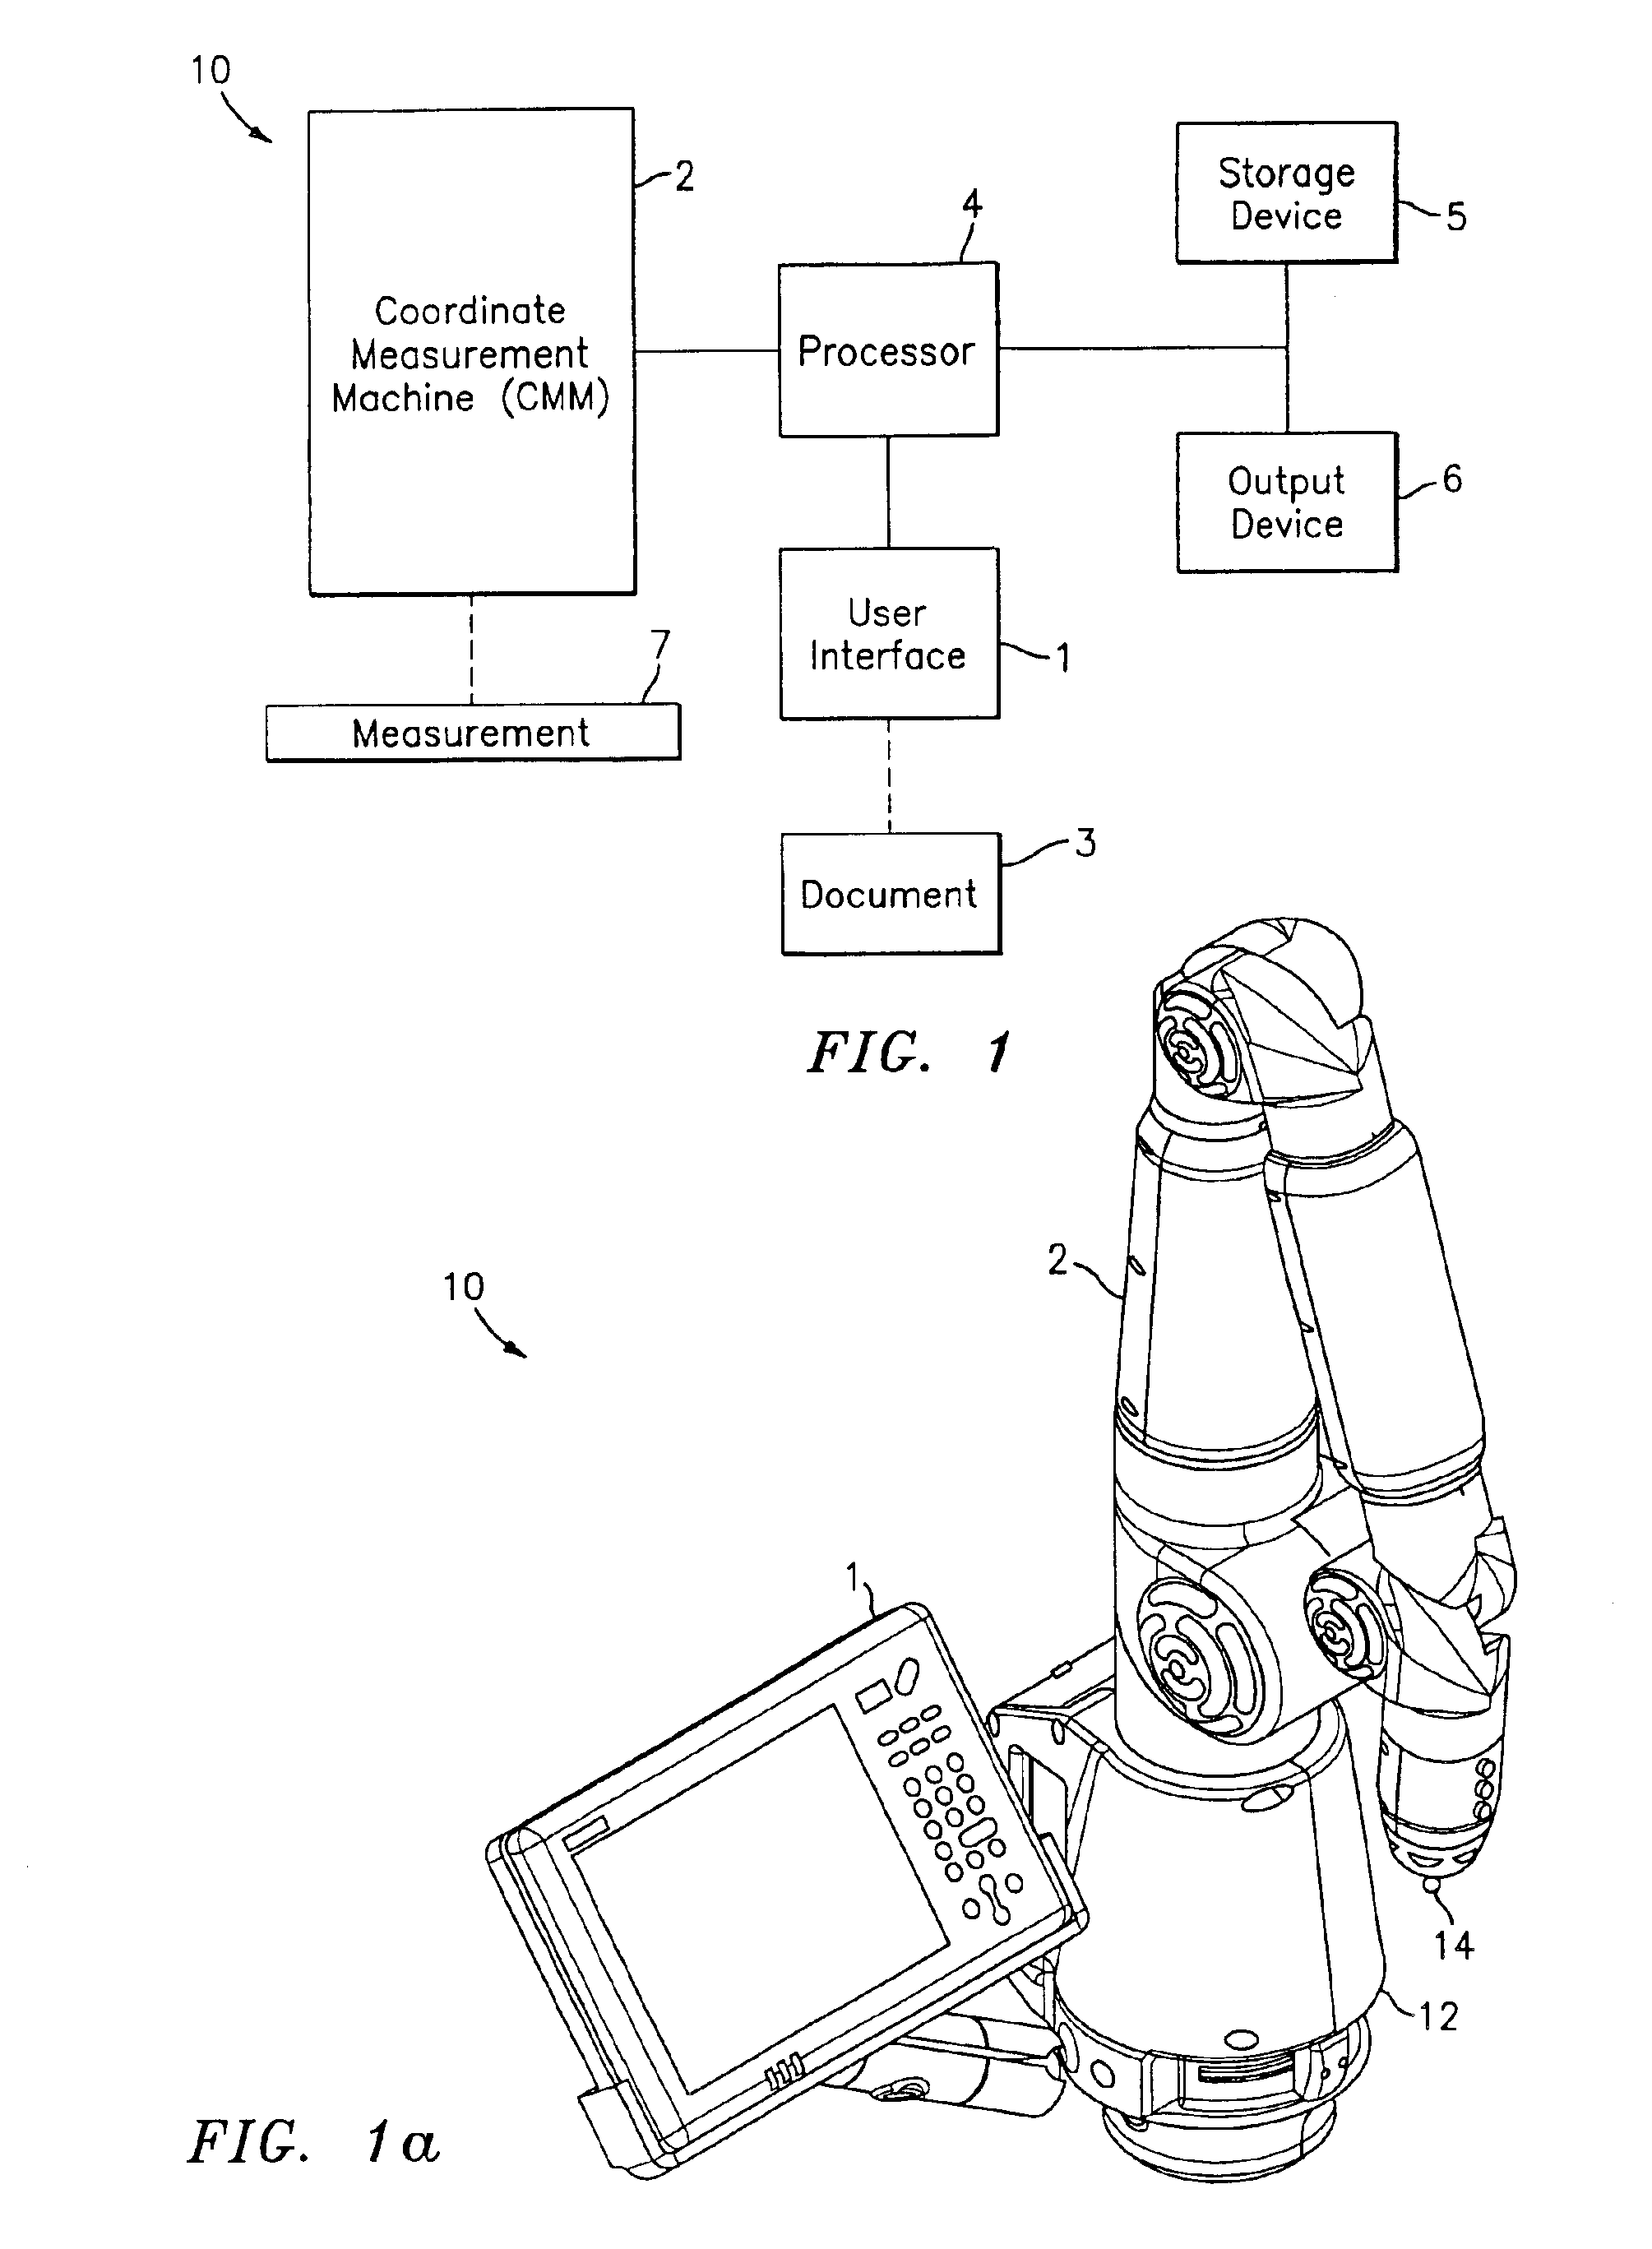 Method and system for assisting a user taking measurements using a coordinate measurement machine